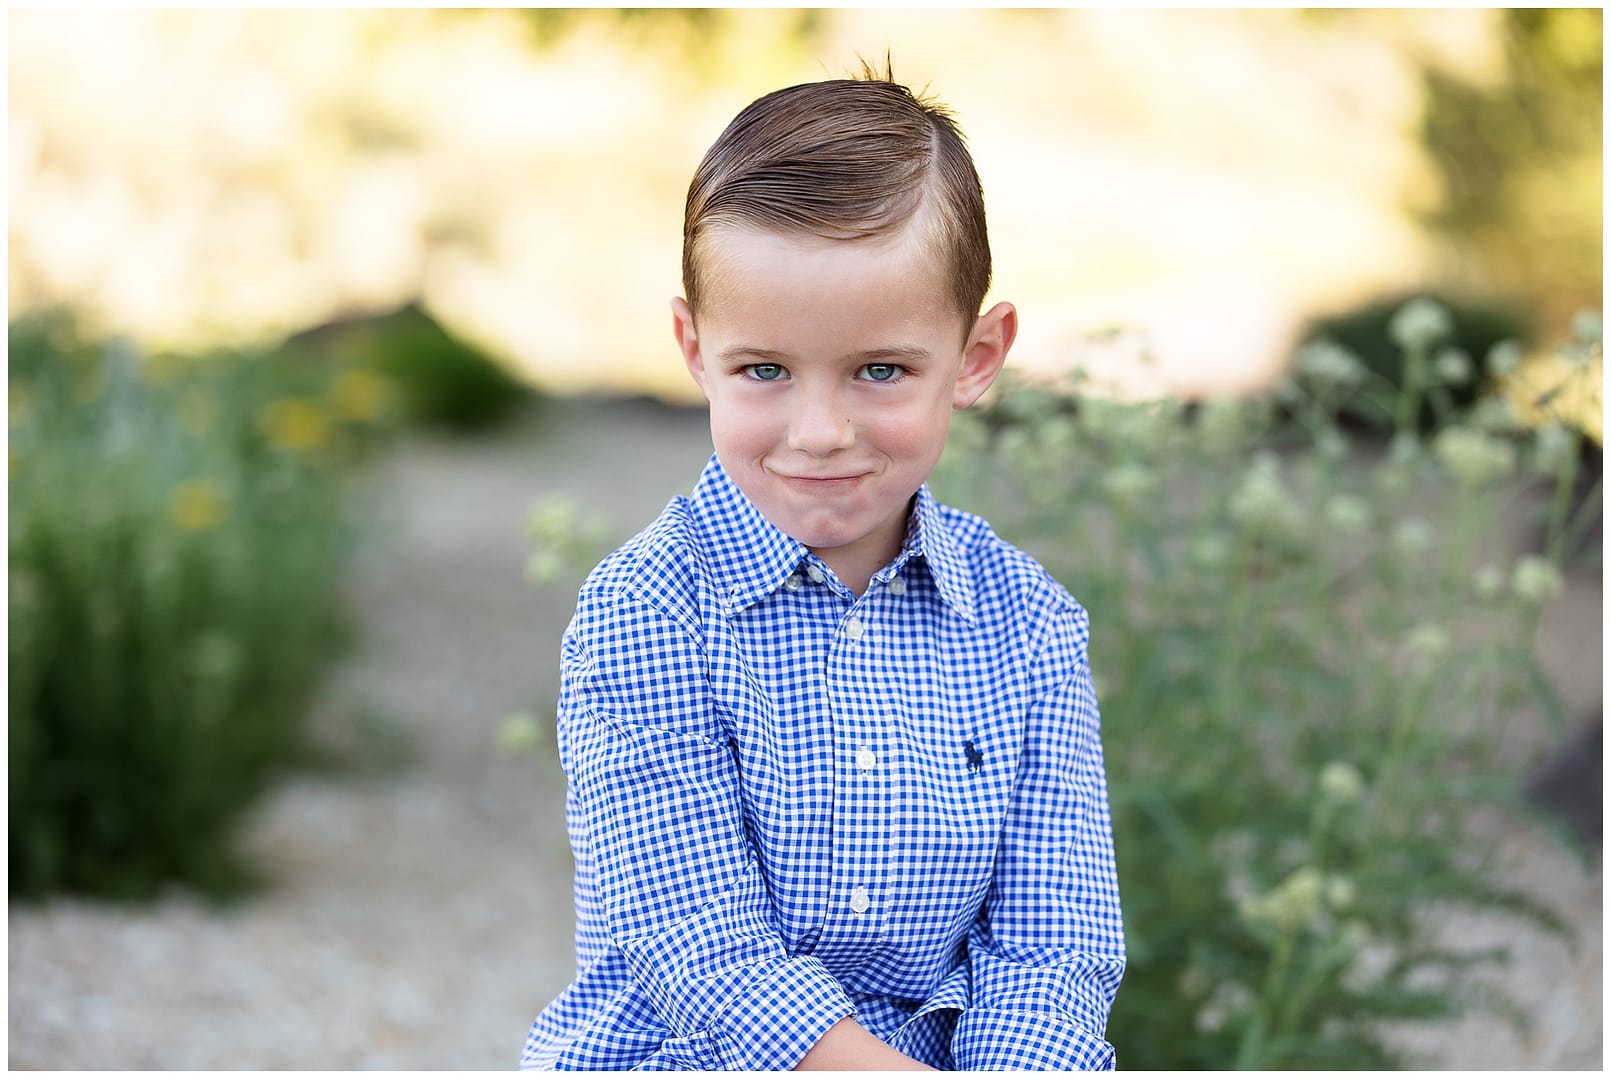 Brown hair blue eyed boy smirks for camera. Photo by Tiffany Hix Photography.